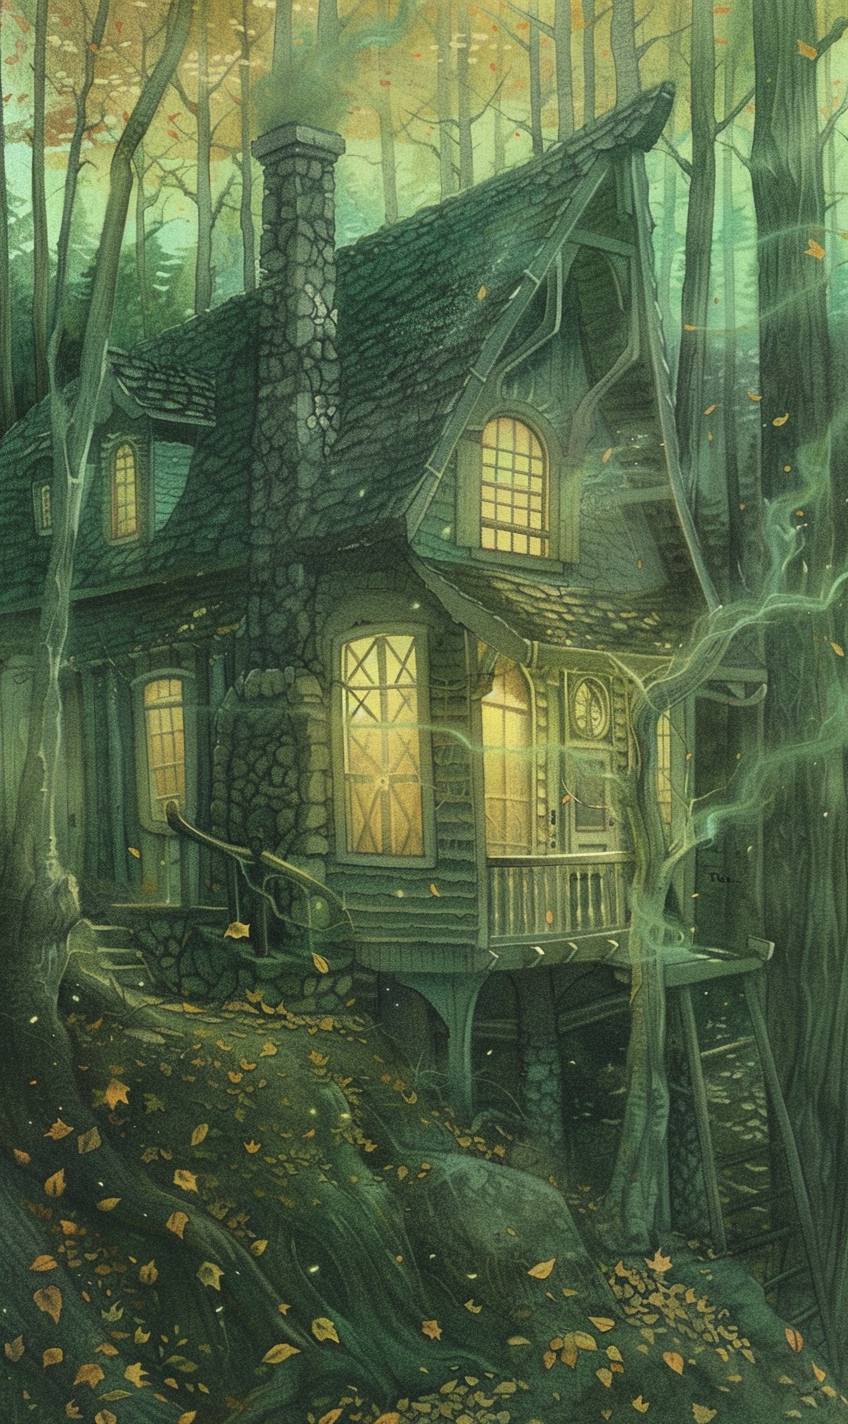 A cozy cottage in the woods during autumn, warm light glowing from the windows, leaves falling gently, smoke rising from the chimney